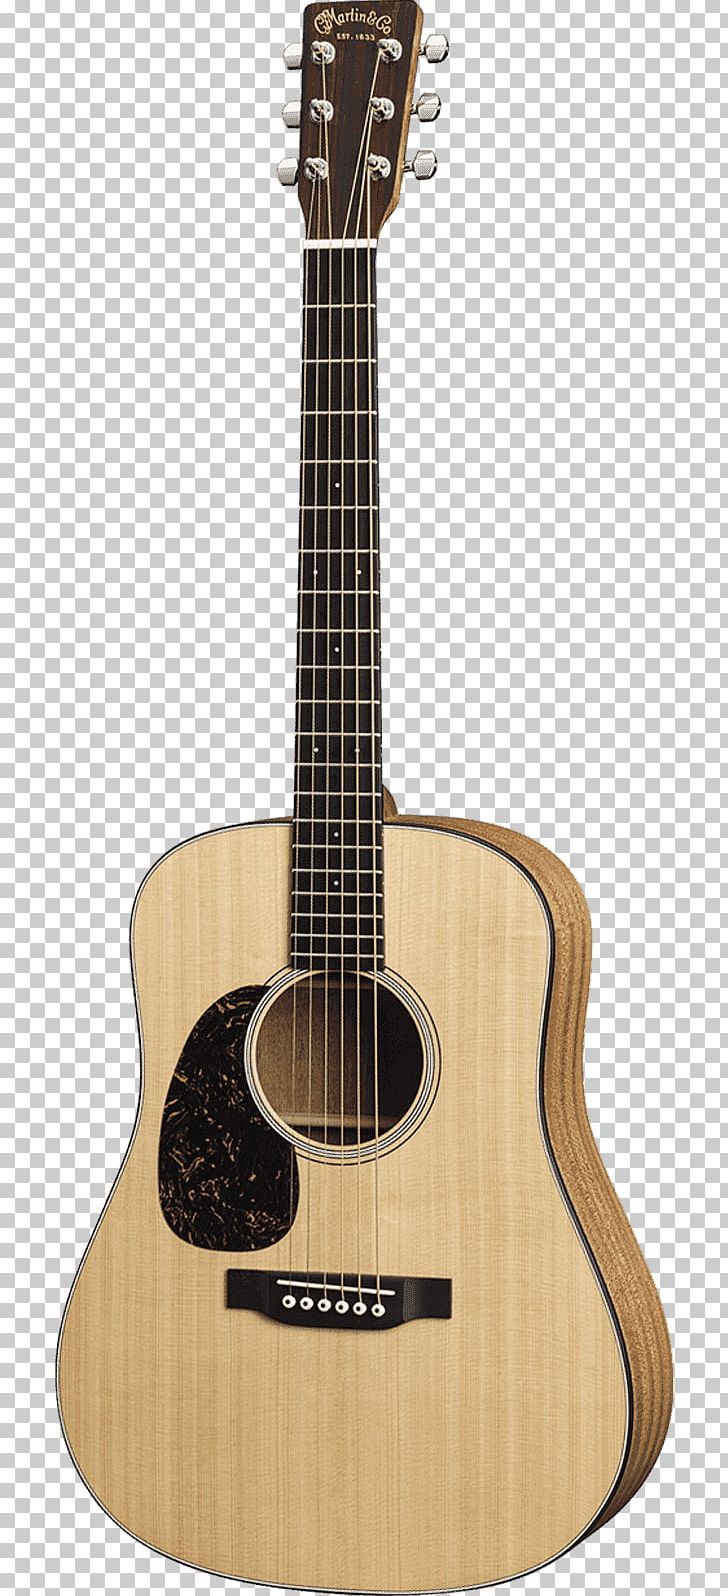 Acoustic-electric Guitar Dreadnought Musical Instruments PNG, Clipart, Acoustic Electric Guitar, Cuatro, Cutaway, Guitar Accessory, Musical Instruments Free PNG Download